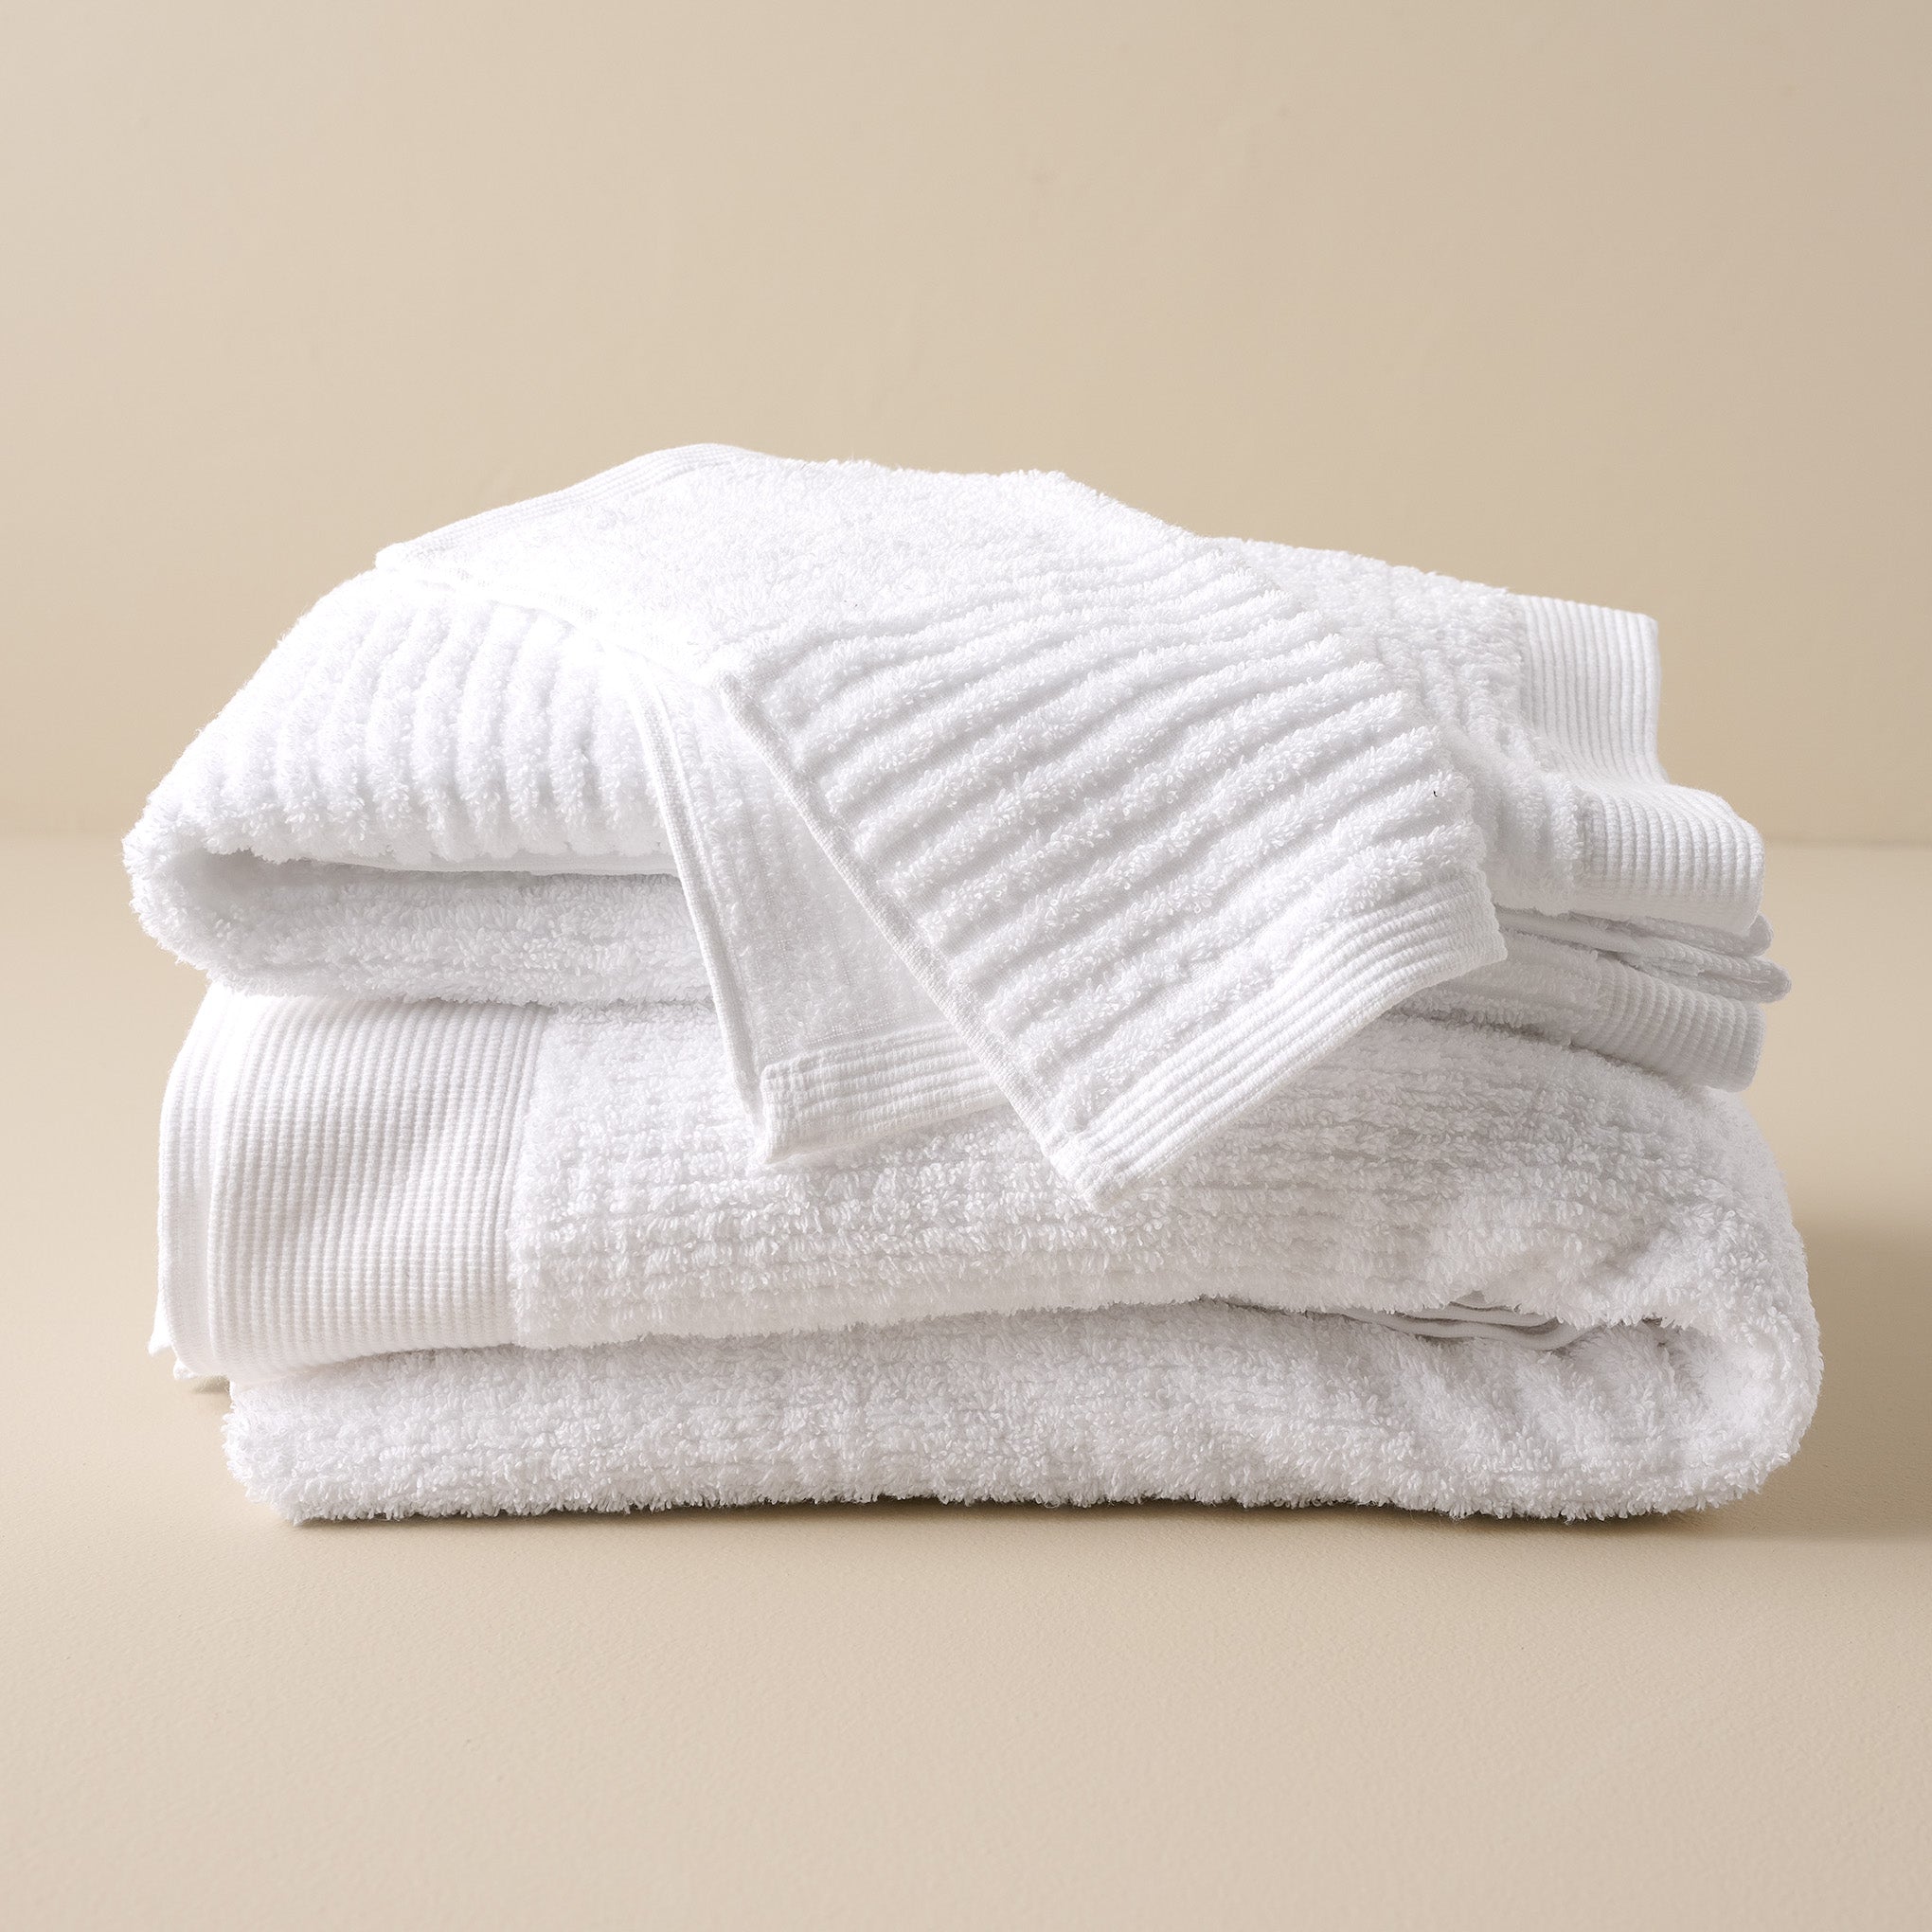 stacked White Textured bath towels and washcloth Items range from $12.00 to $42.00